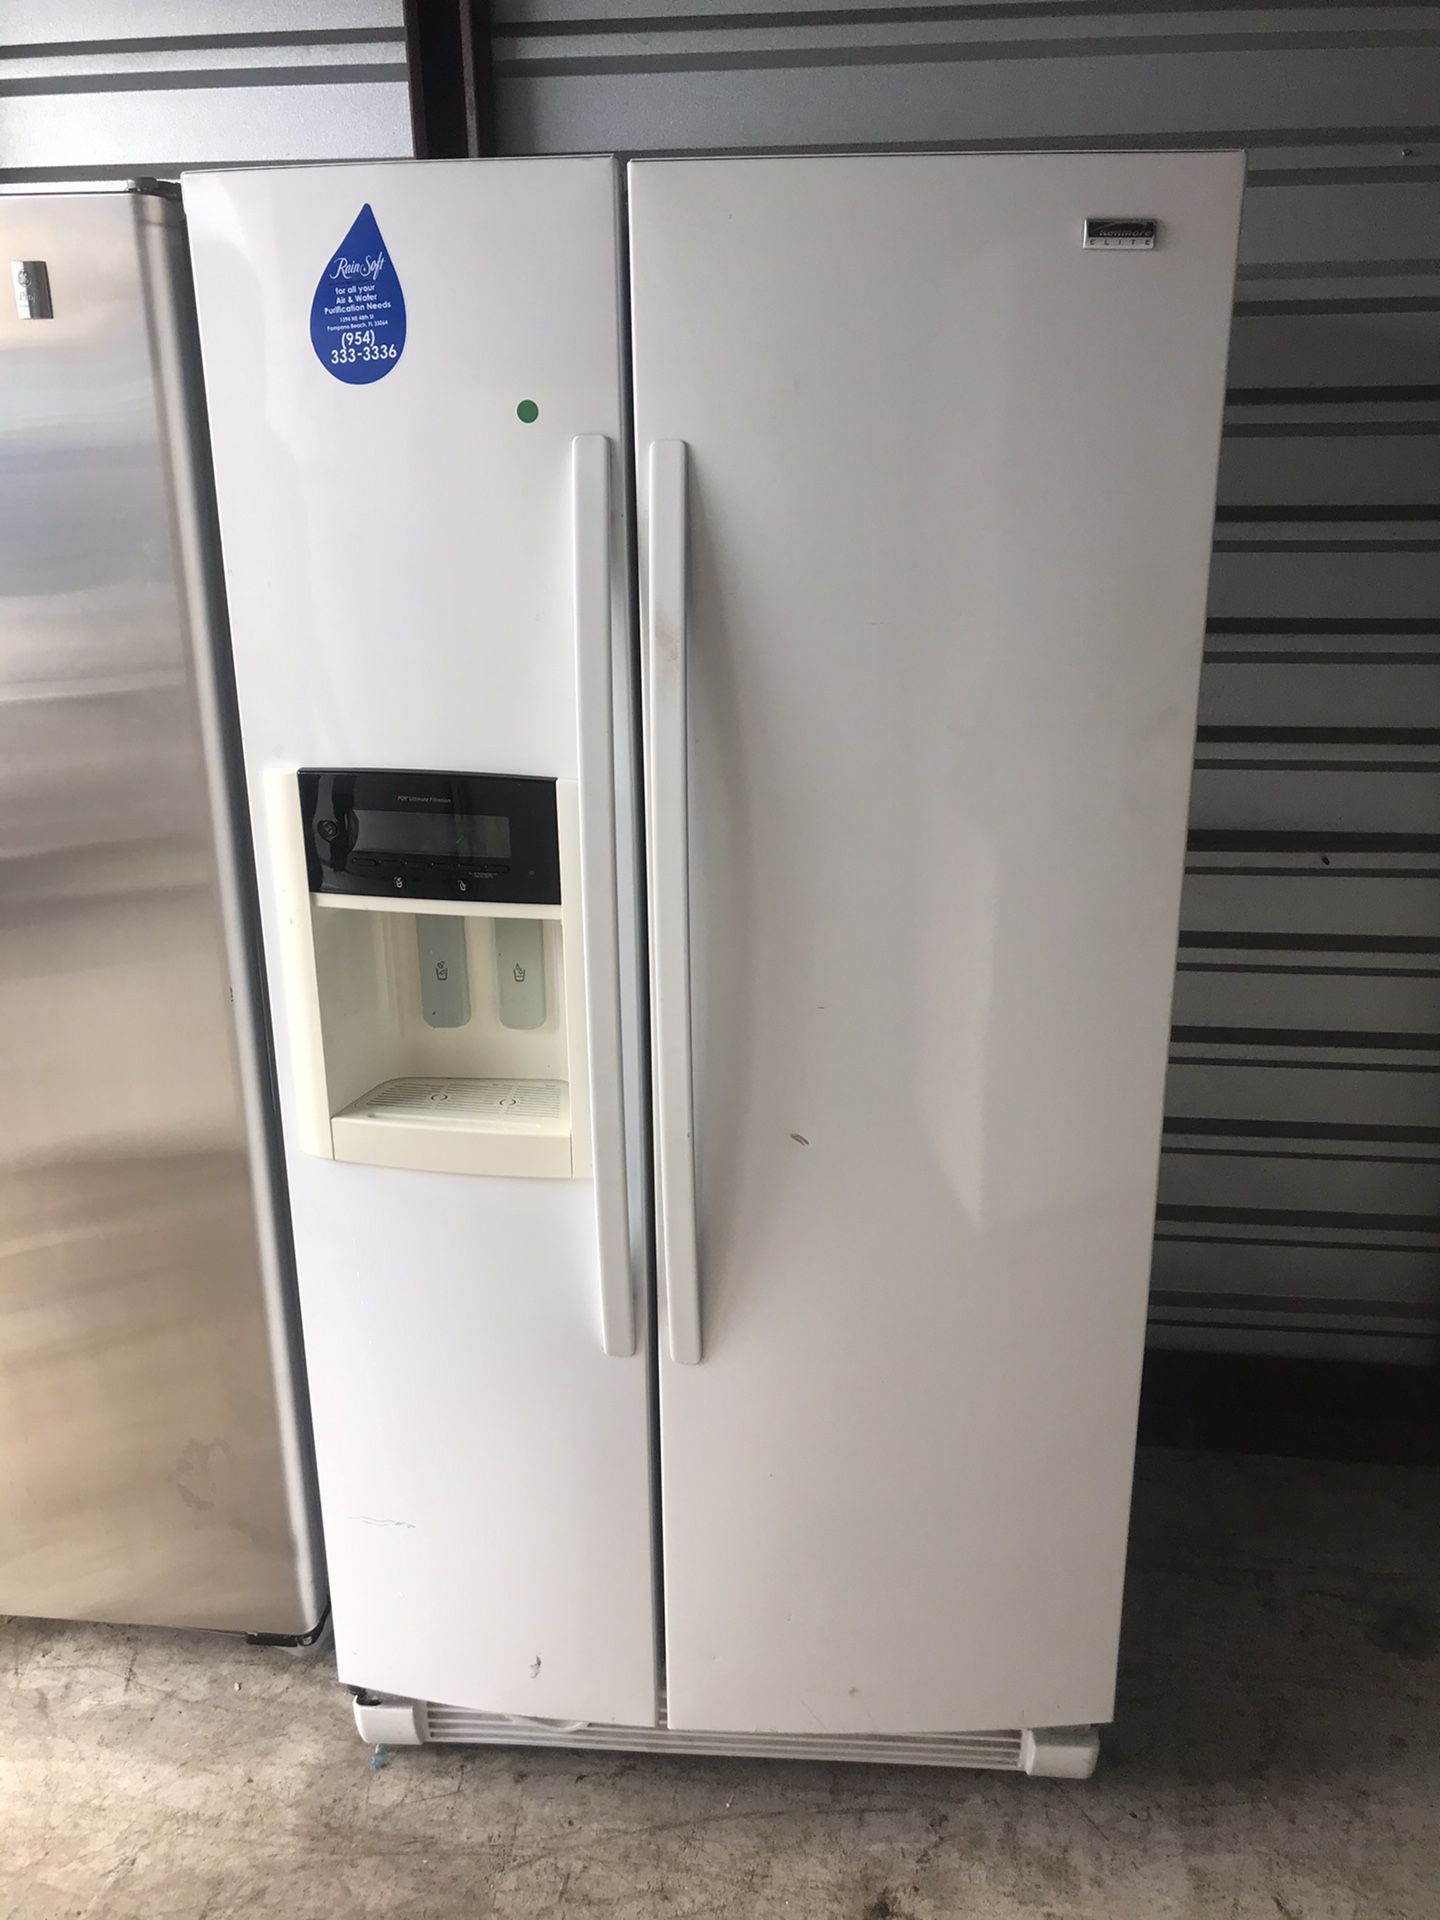 Kenmore Elite Side By Side Refrigerator For Sale In Miami Fl Offerup